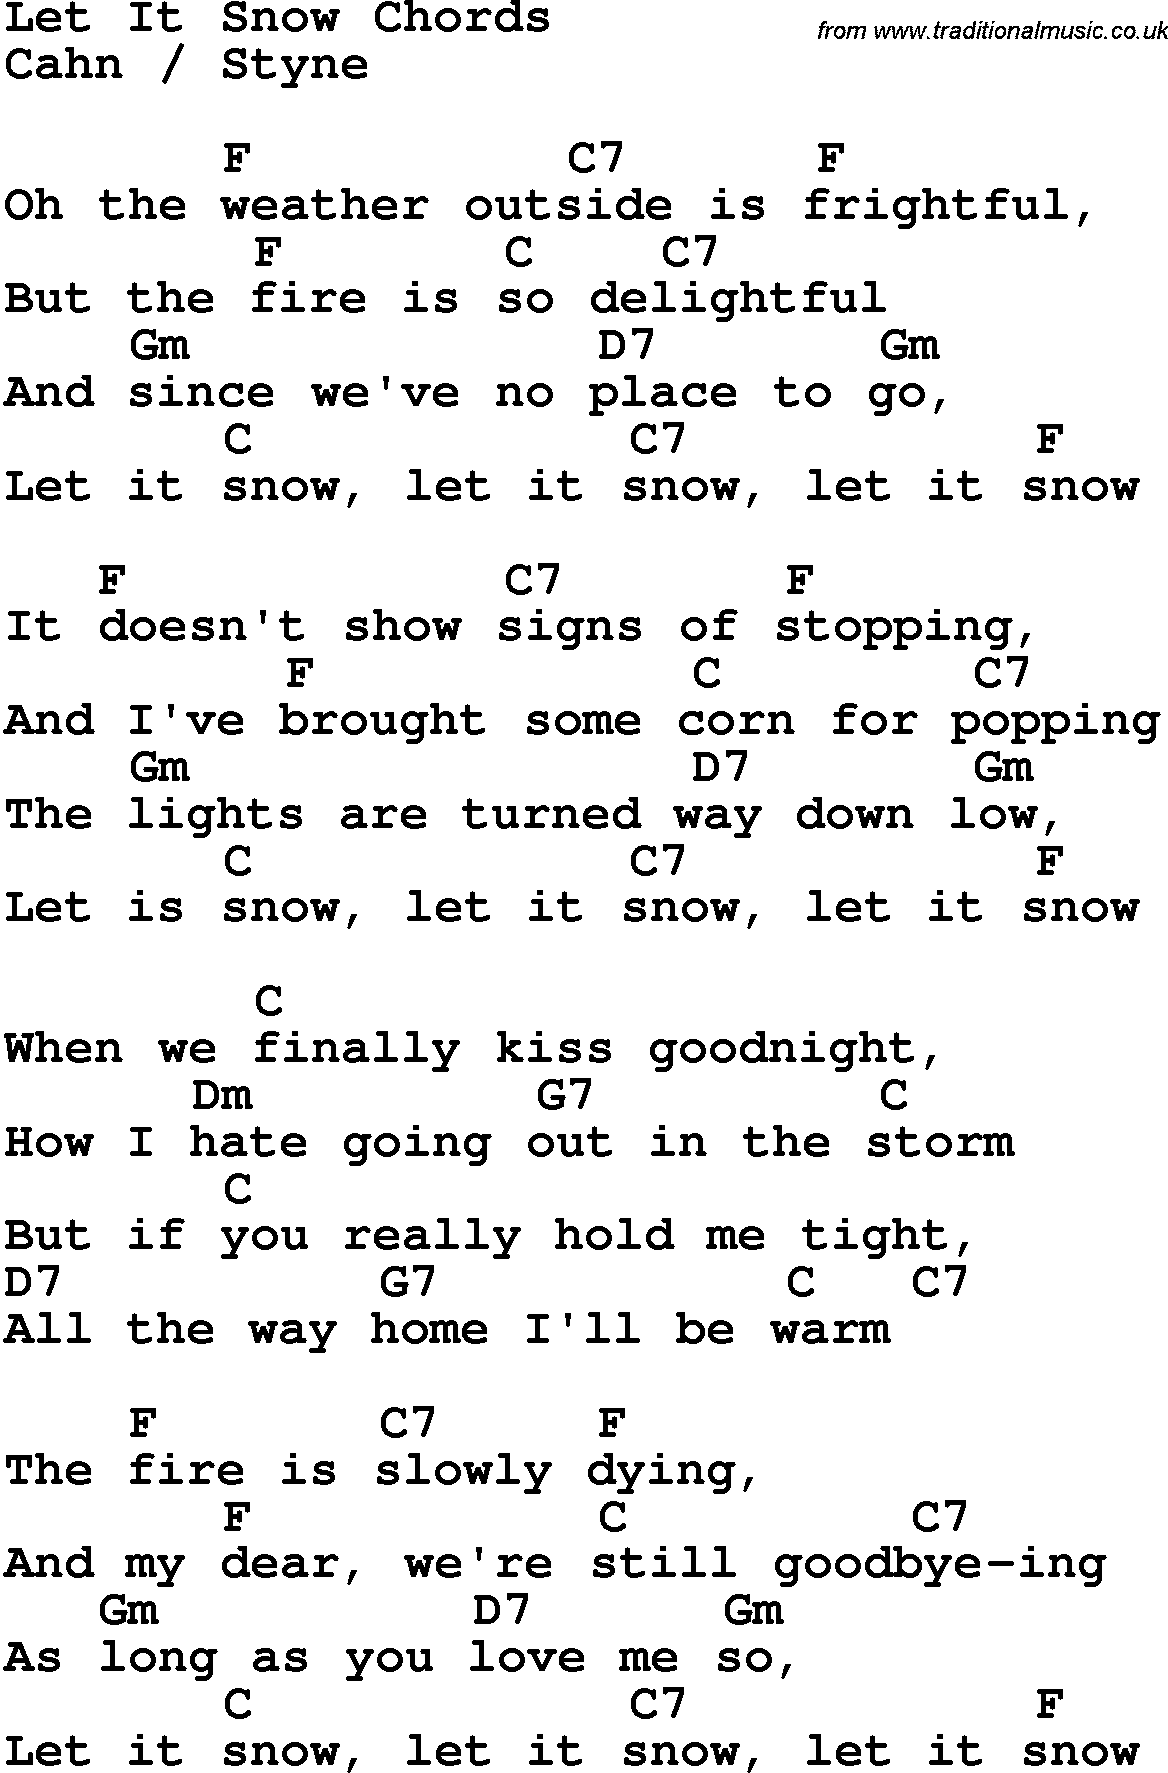 Song Lyrics with guitar chords for Let It Snow